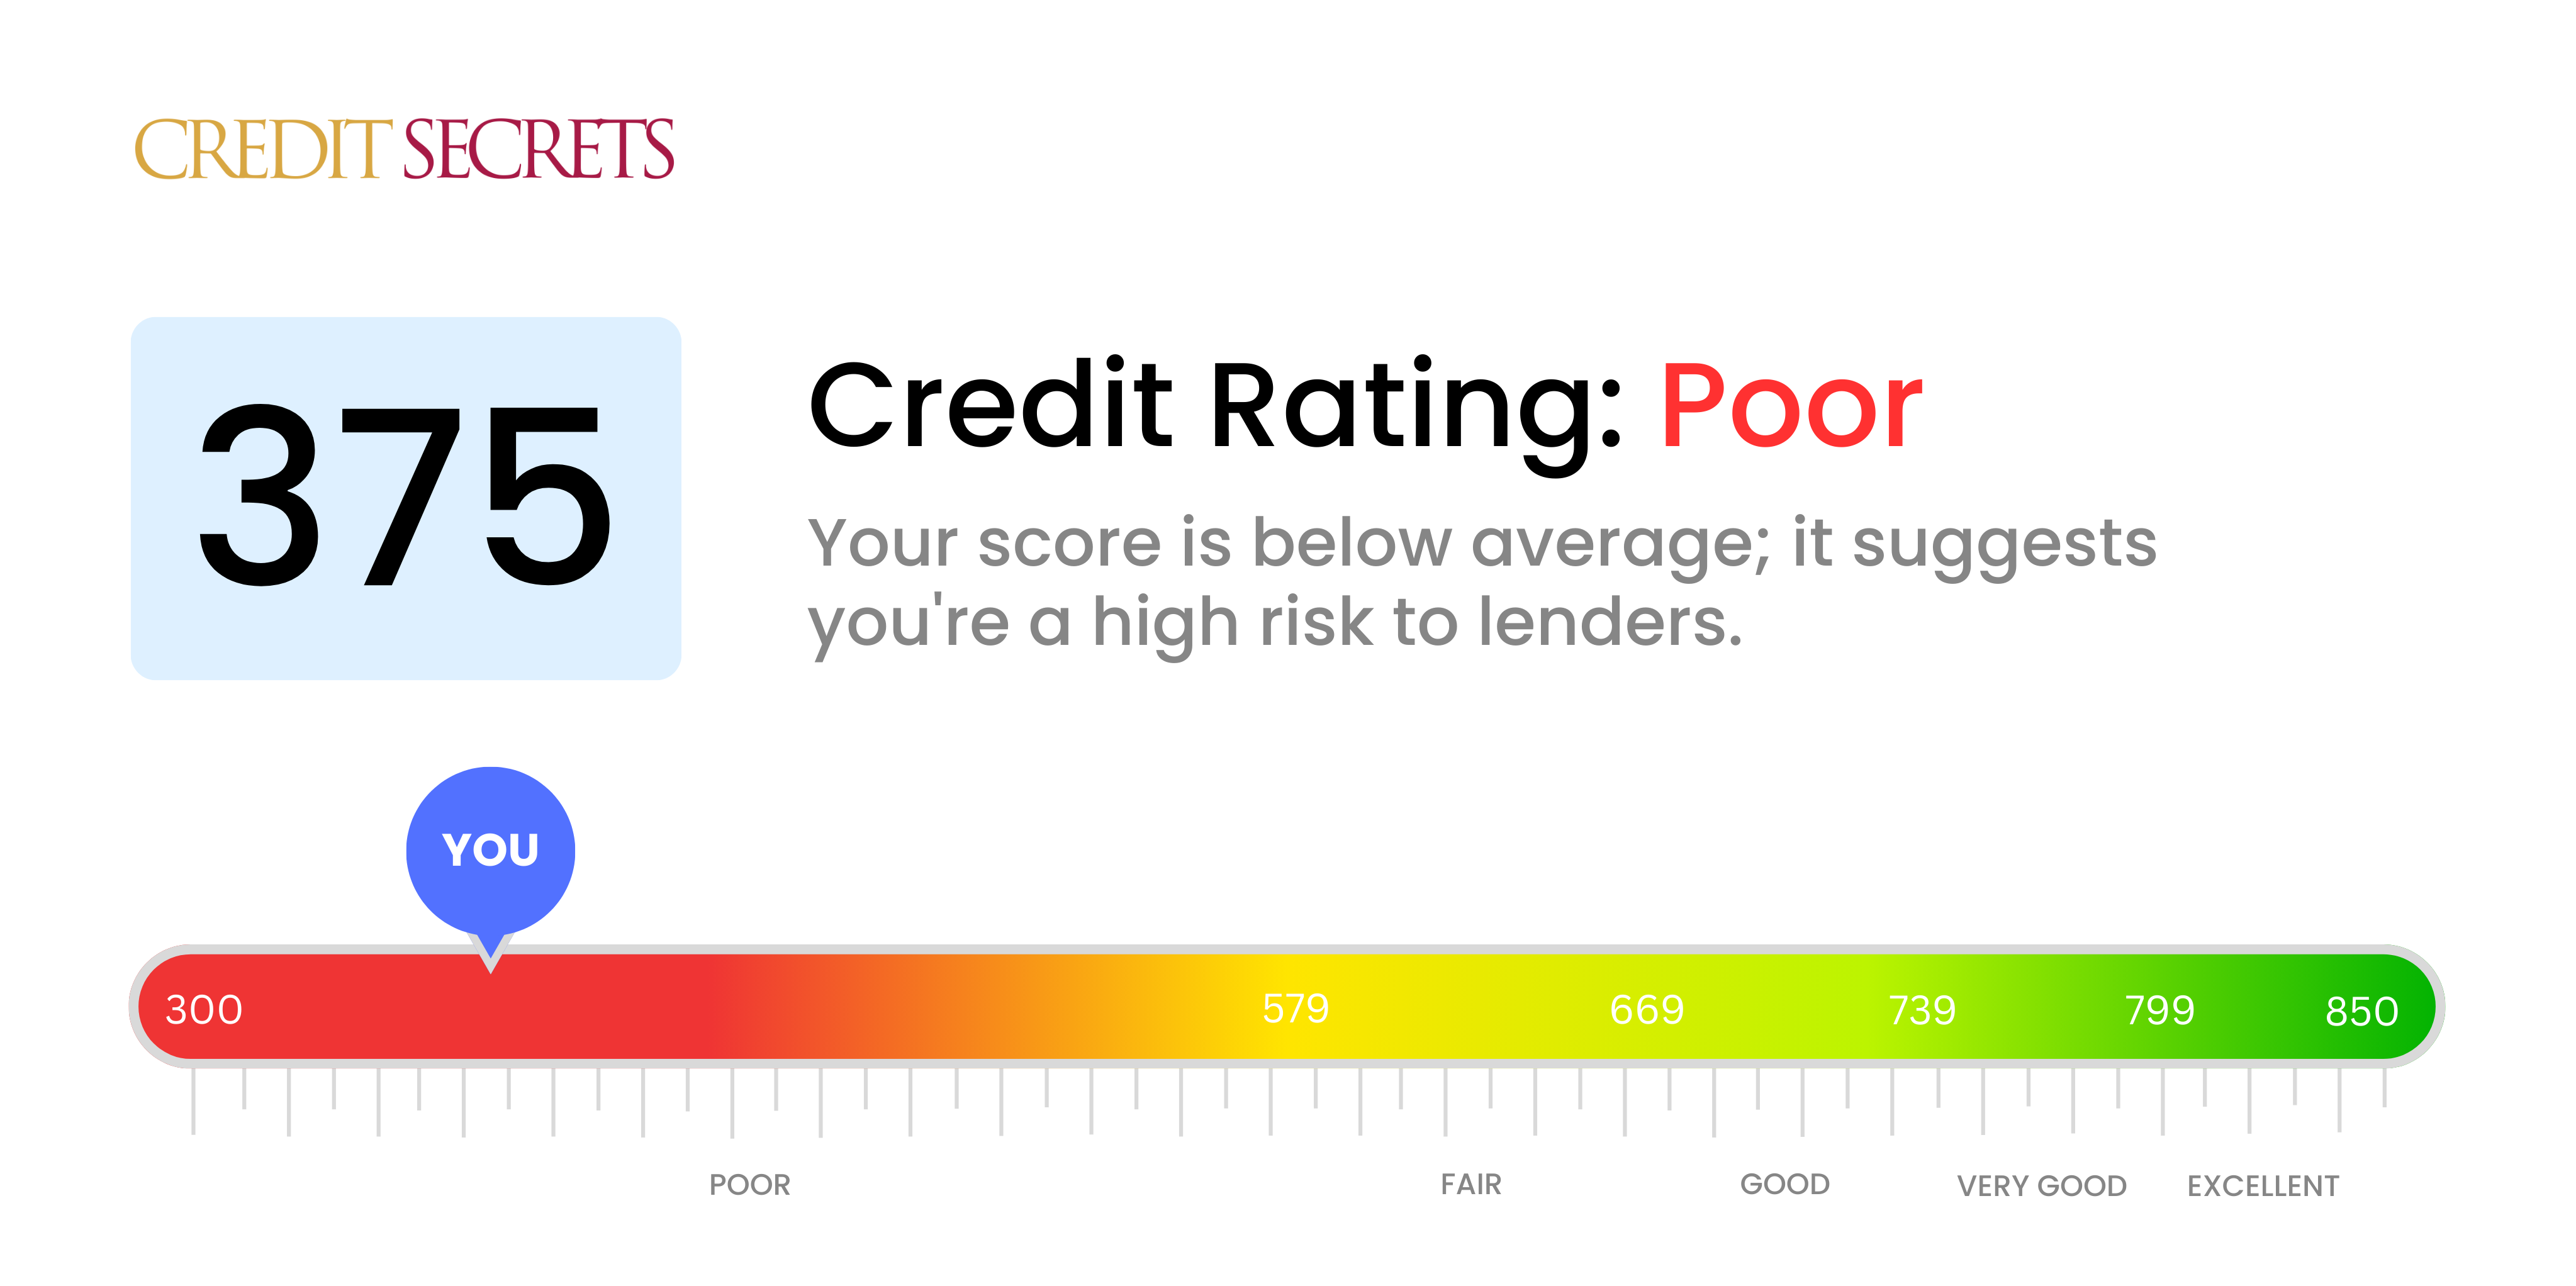 Is 375 a good credit score?